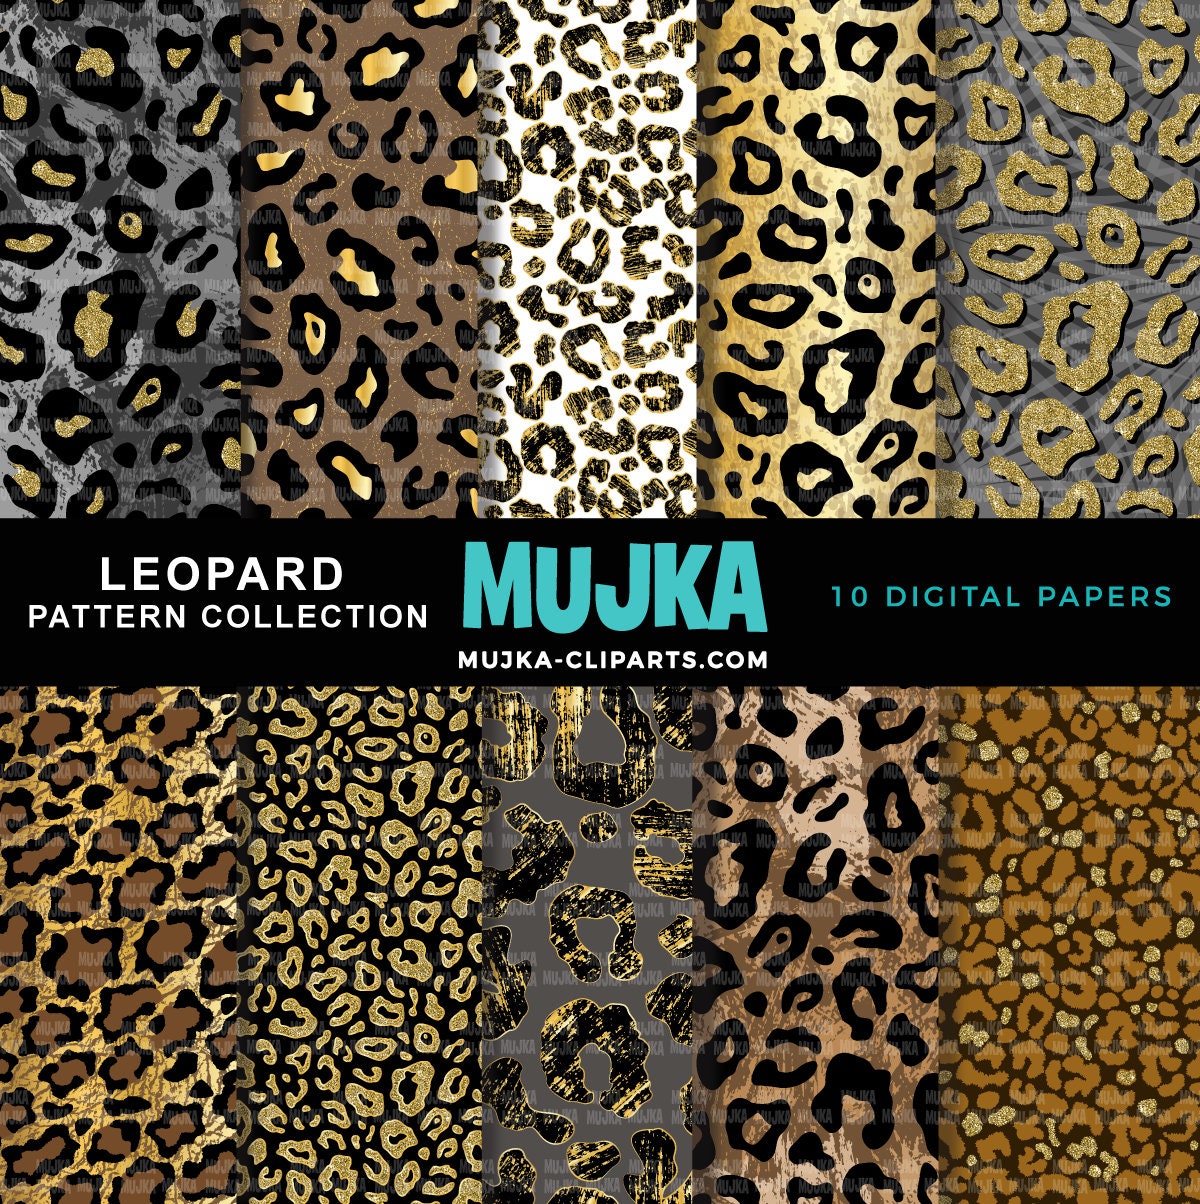 Leopard digital papers, leopard seamless pattern, sublimation designs, digital papers, glam papers, geometric patterns, scrapbook papers